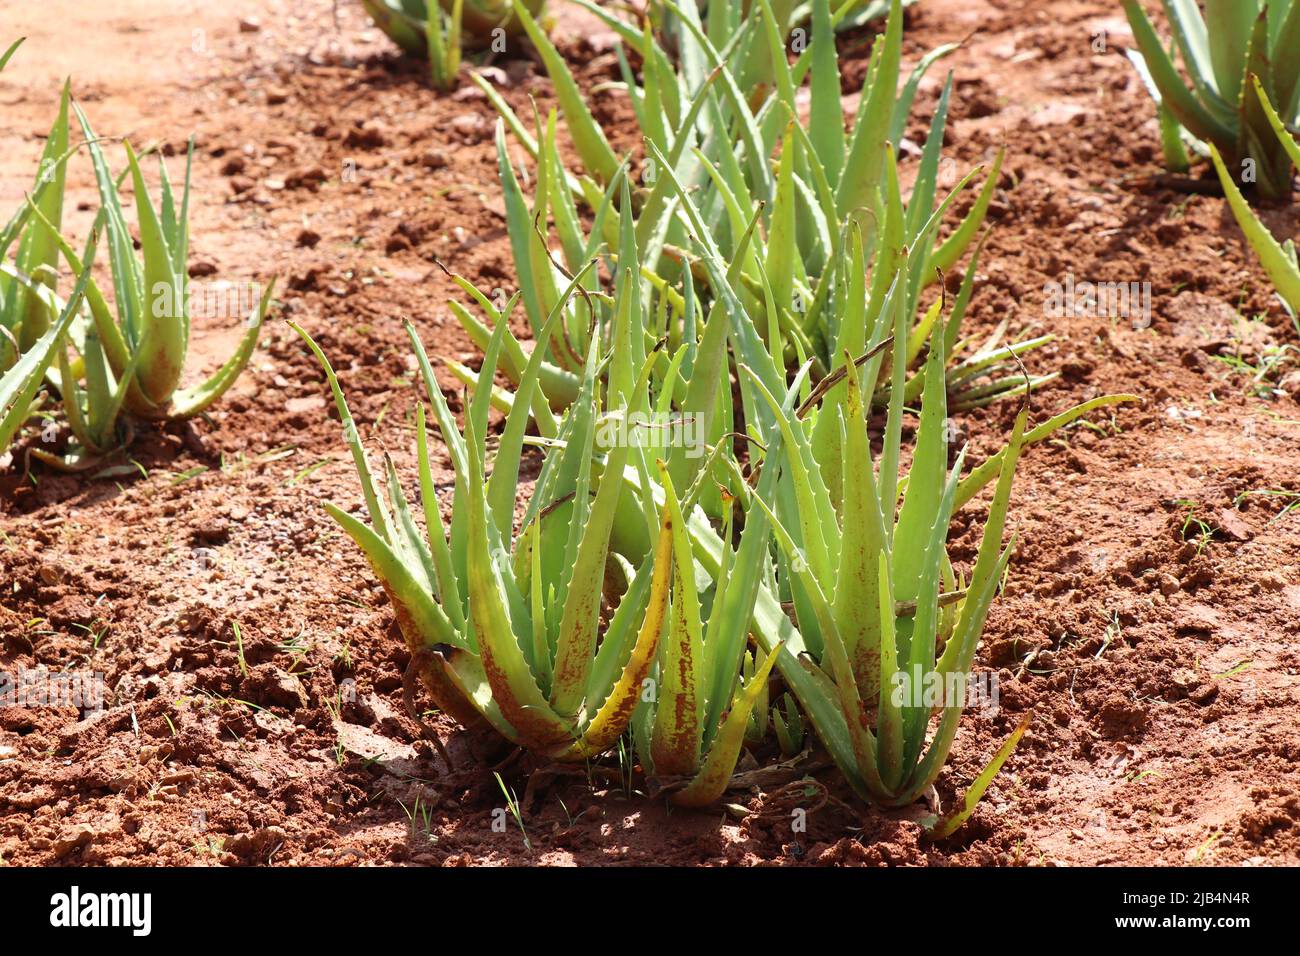 Aloe vera plants with fresh leaves grown in small groups on the ground Stock Photo